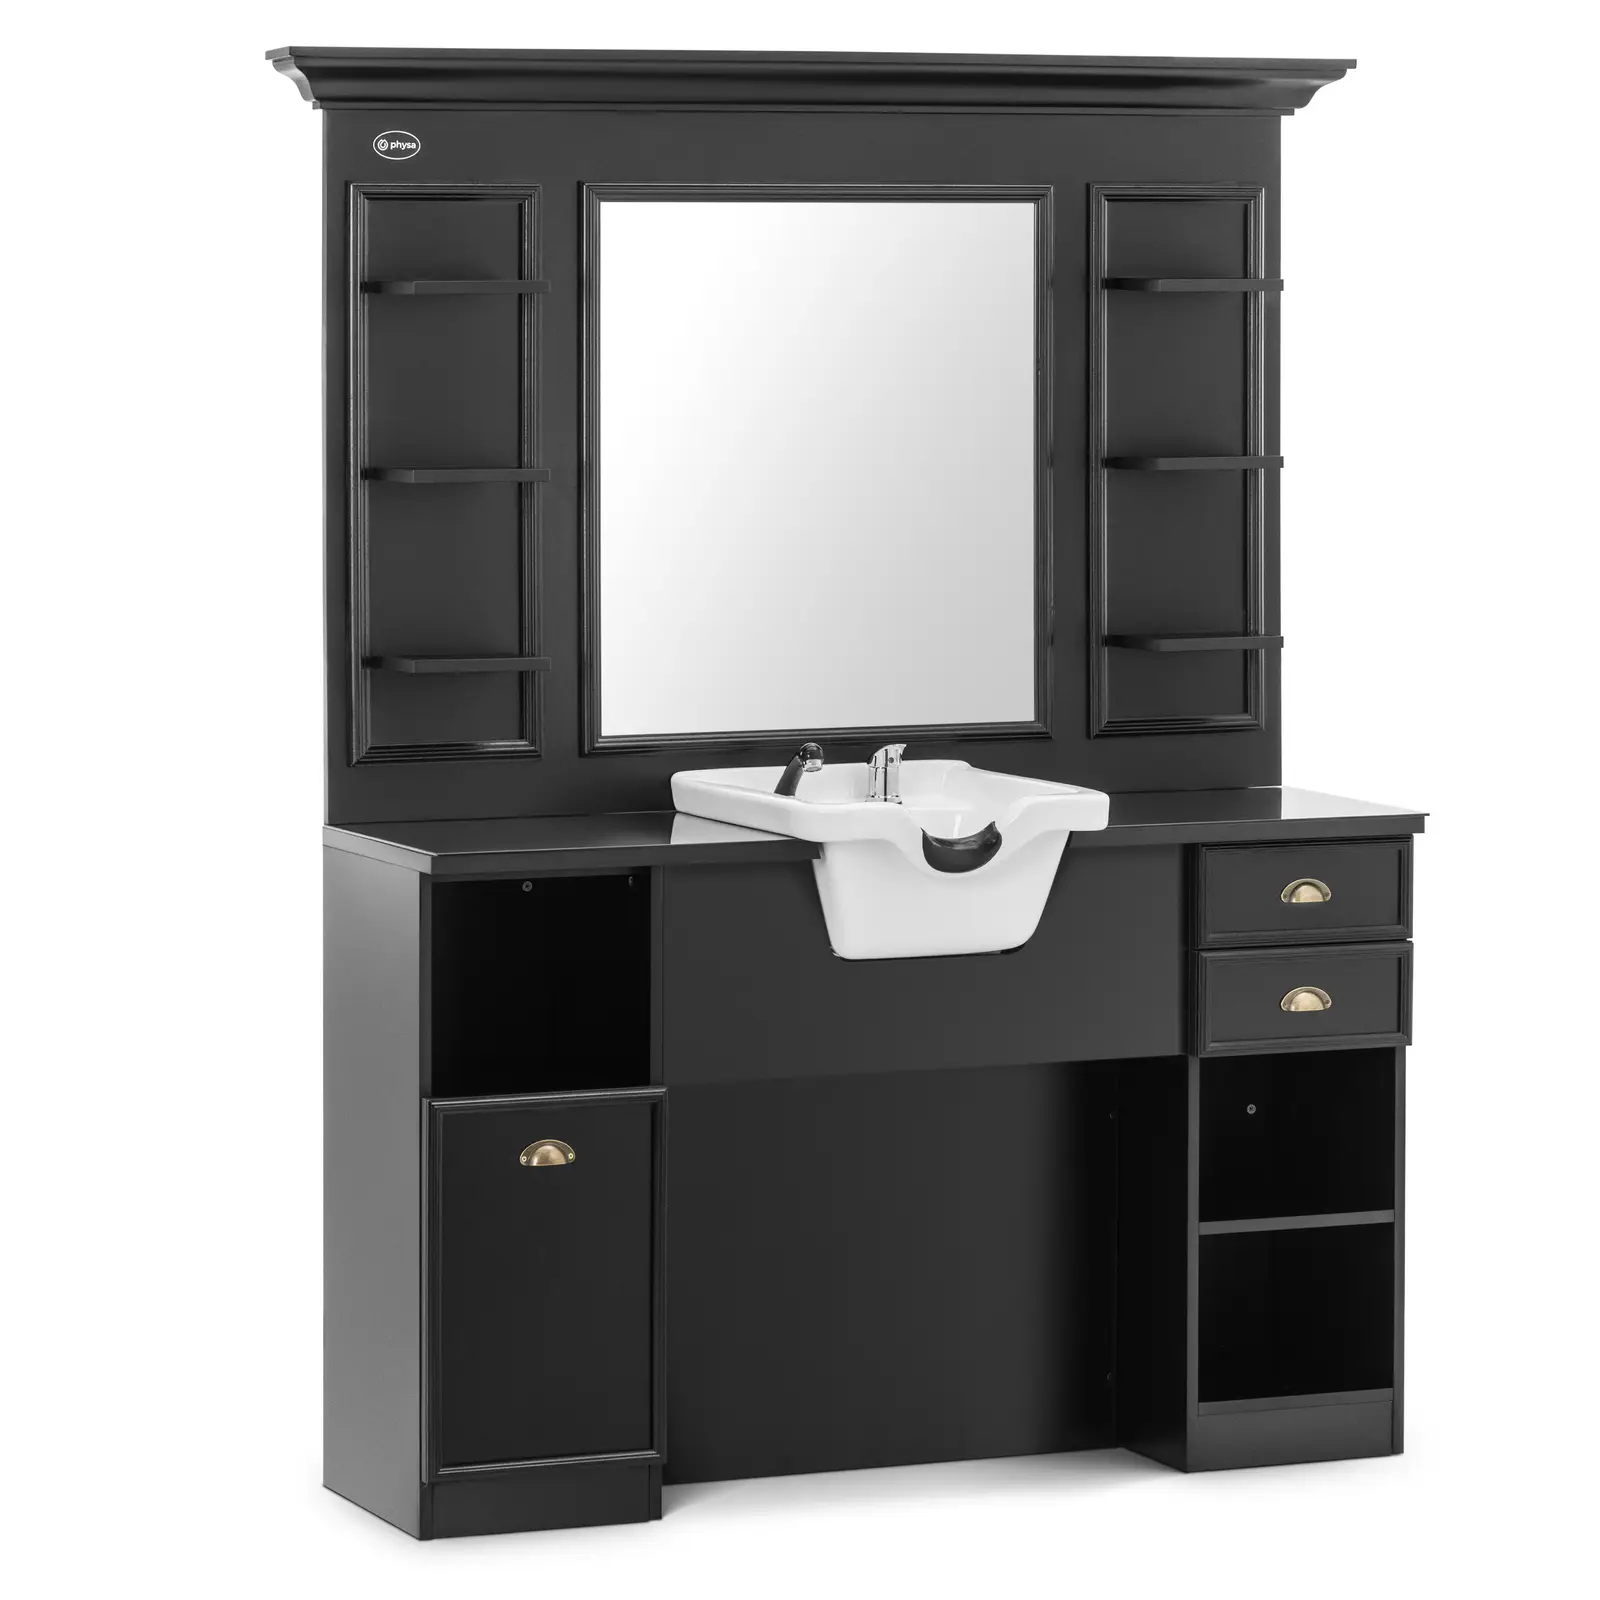 Hairdressing Station - with backwash basin and mirror - brown